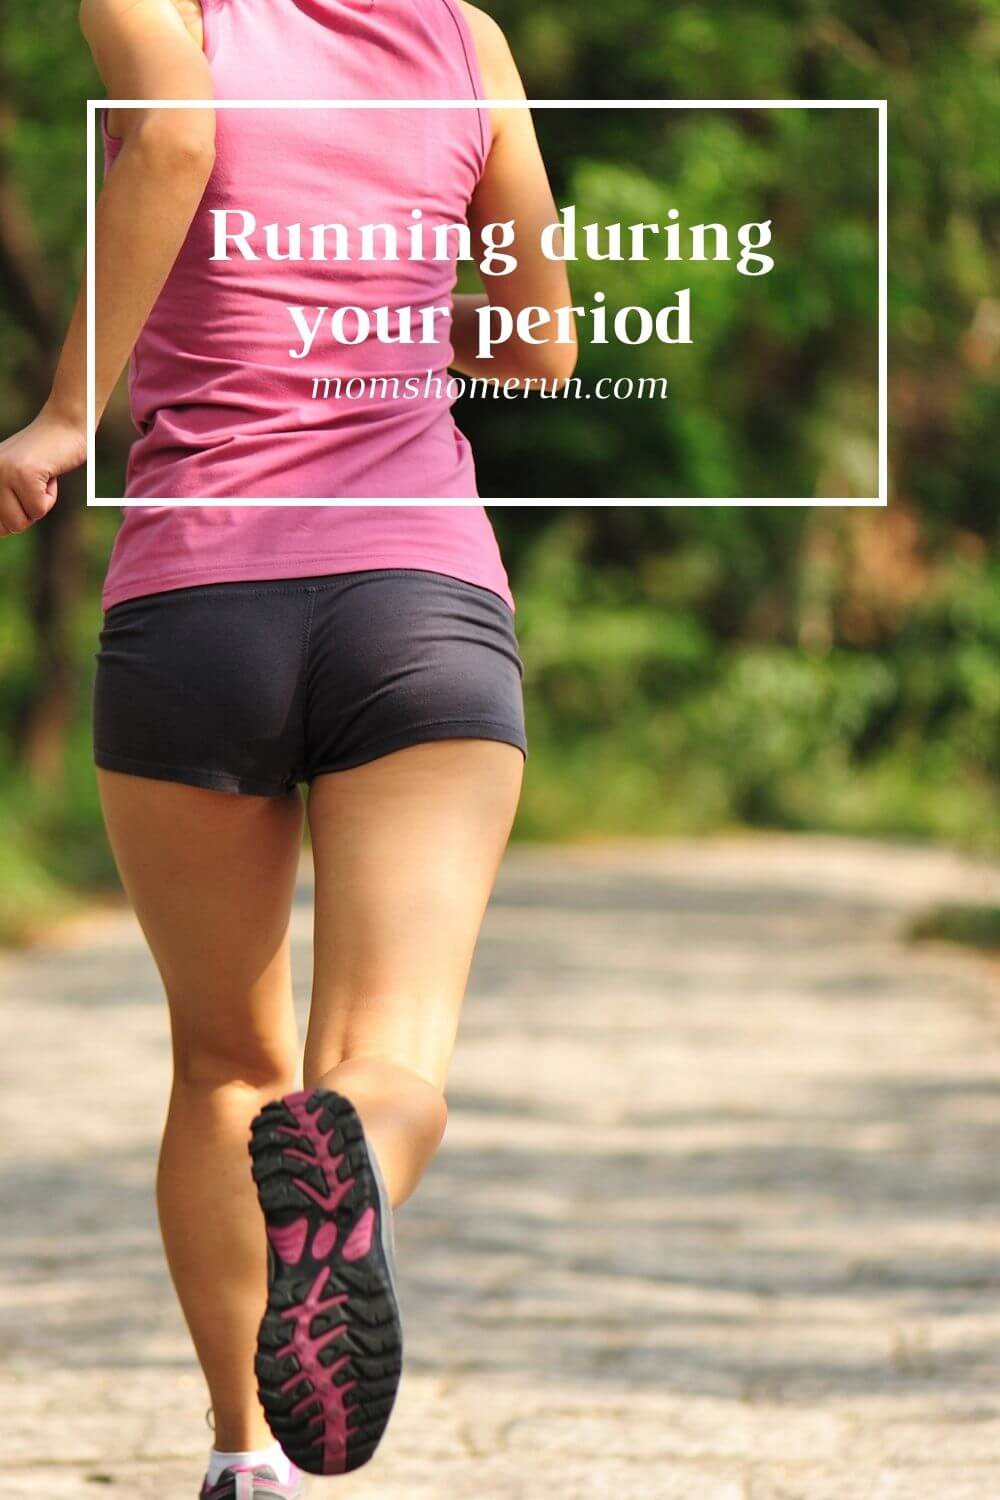 Running during your period